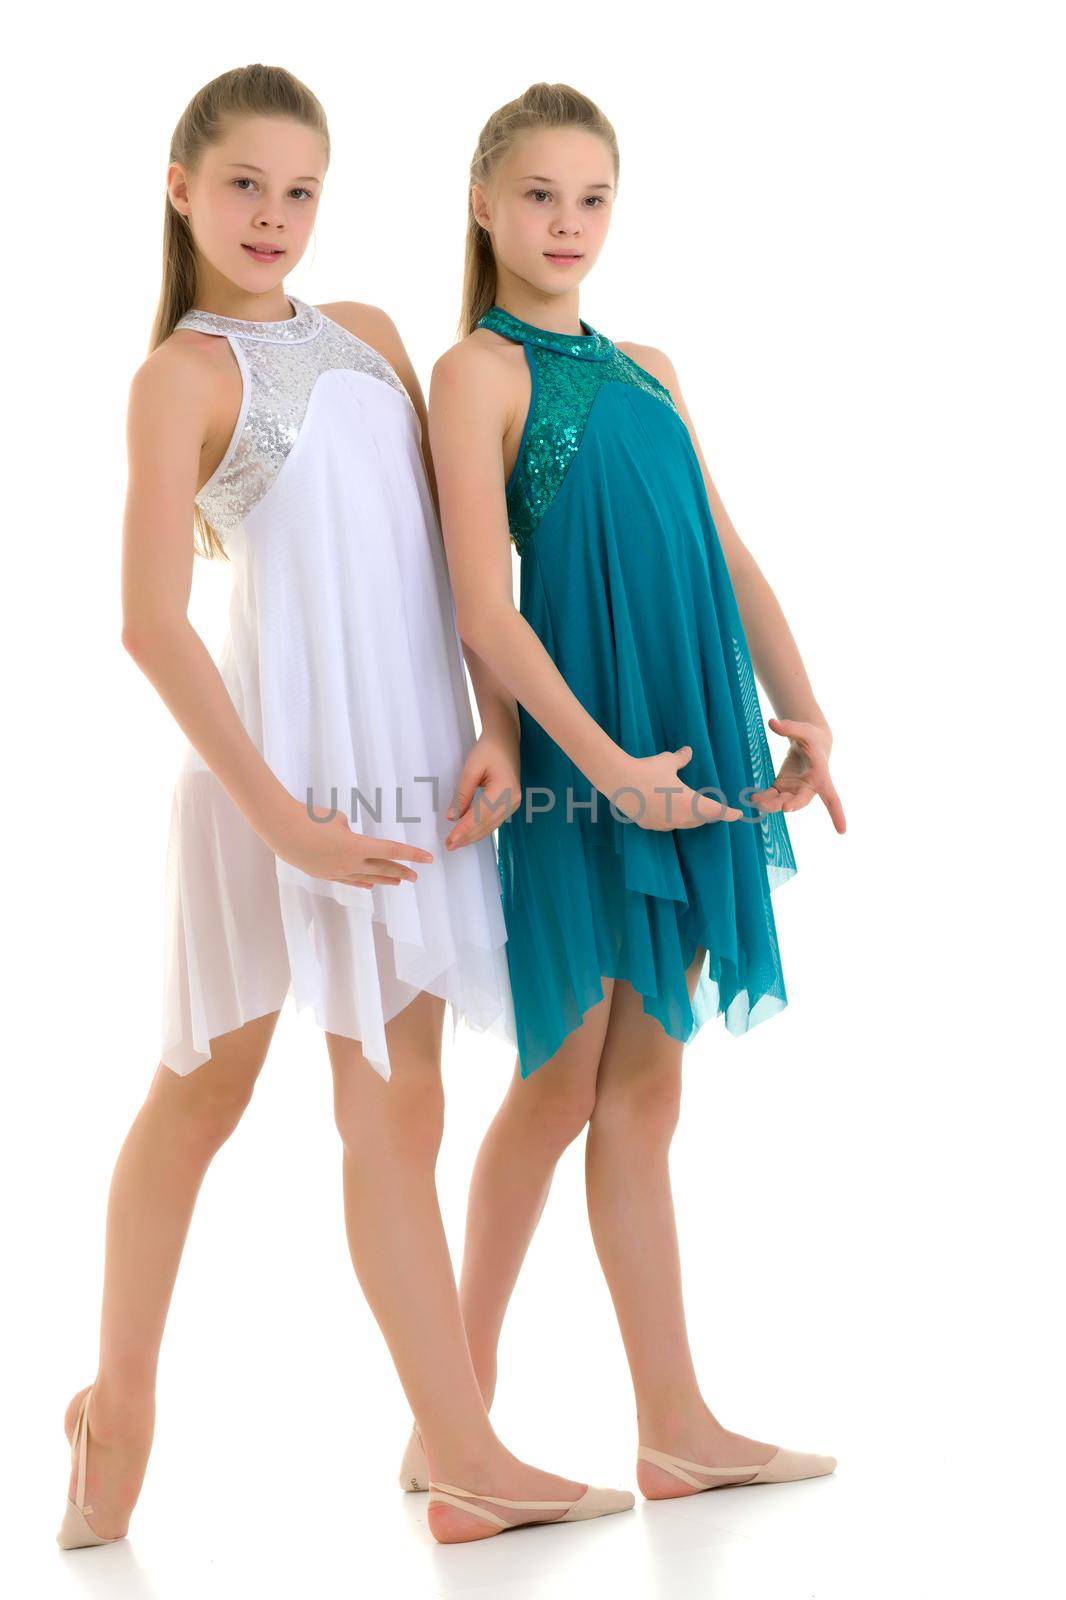 Pretty Graceful Ballet Dancers Performing in Studio, Two Beautiful Twin Sisters Dancing Wearing White and Blue Sport Dresses, Two Teenage Girls Posing in Studio Against White Background